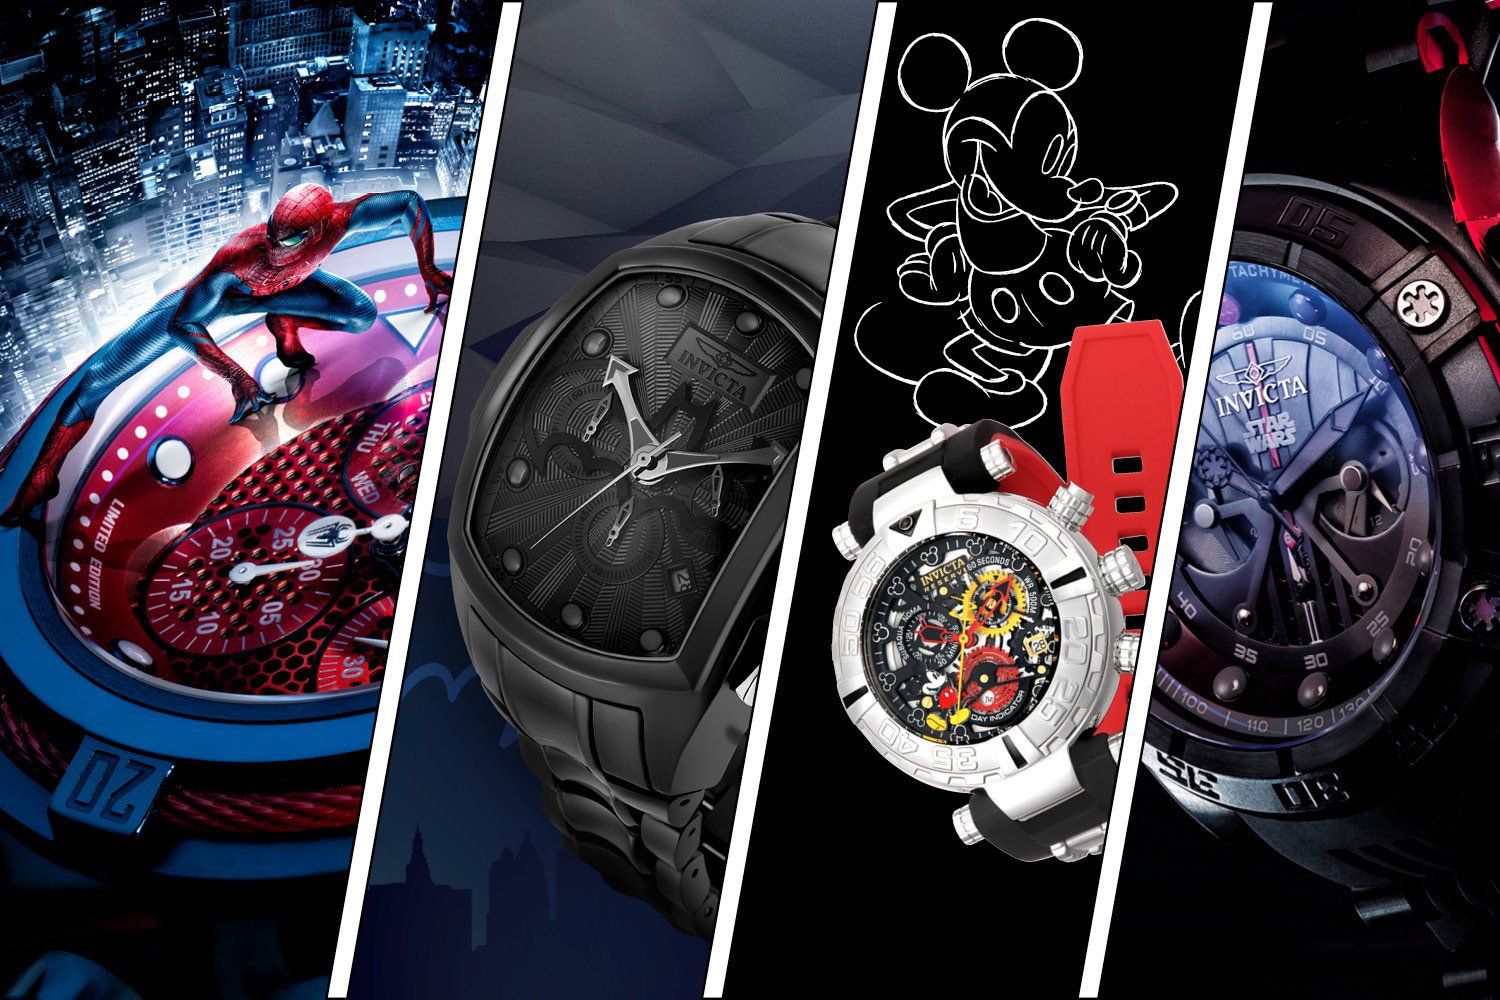 Invicta Heroes - Official Invicta Store - Buy Online!